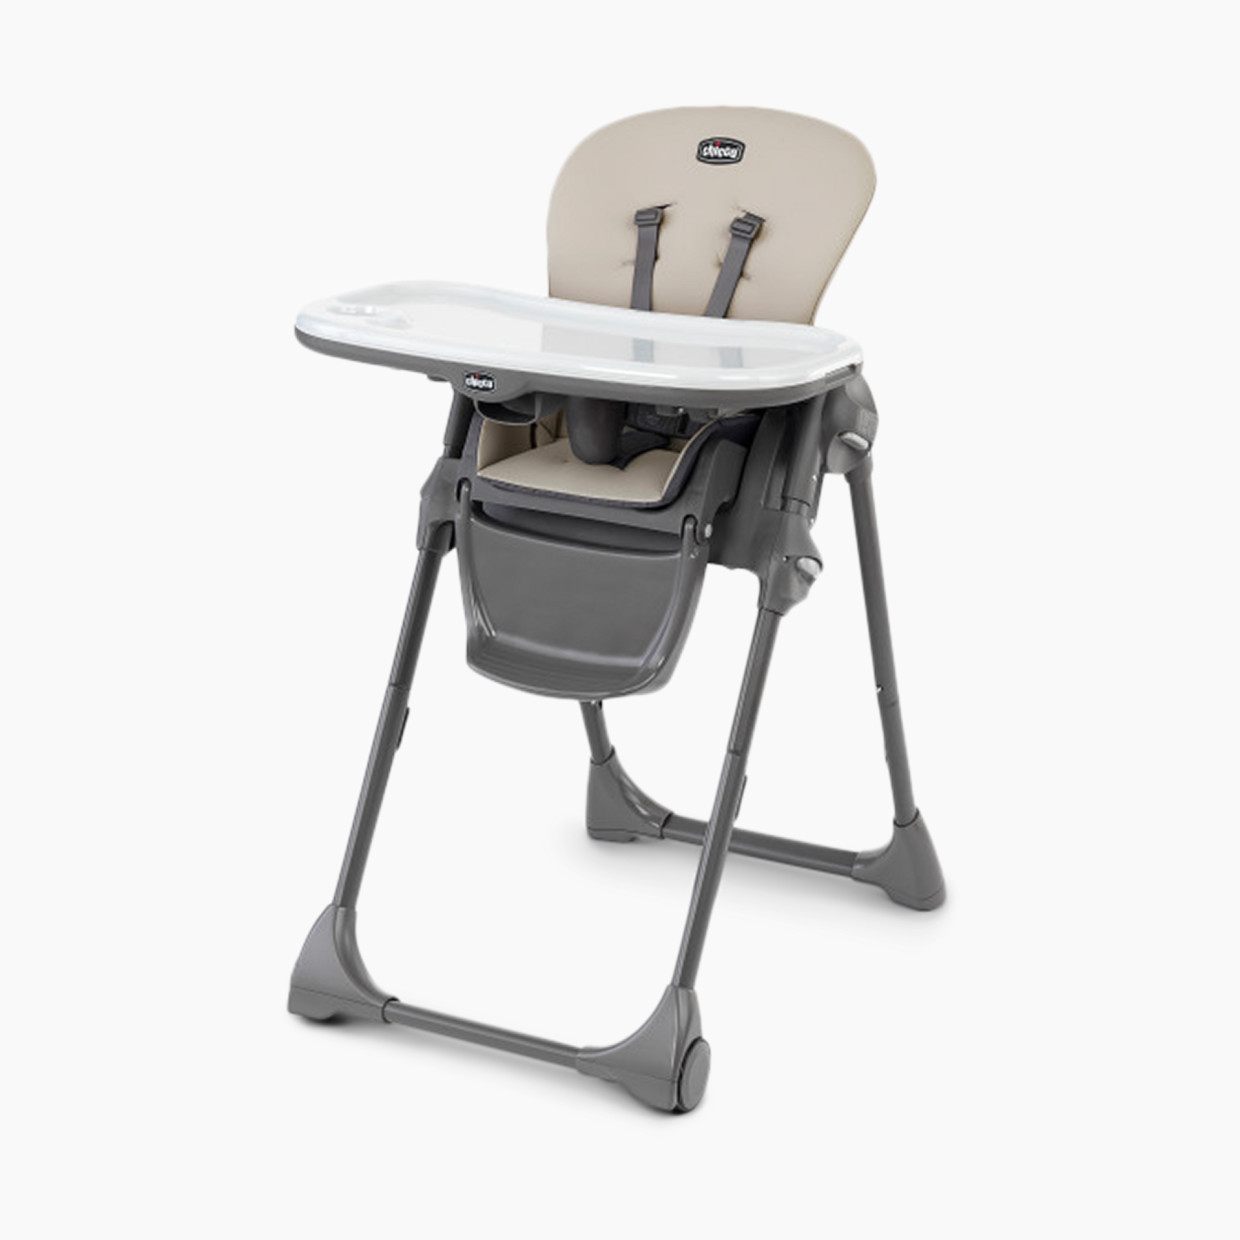 Chicco Polly Folding Highchair - Taupe.